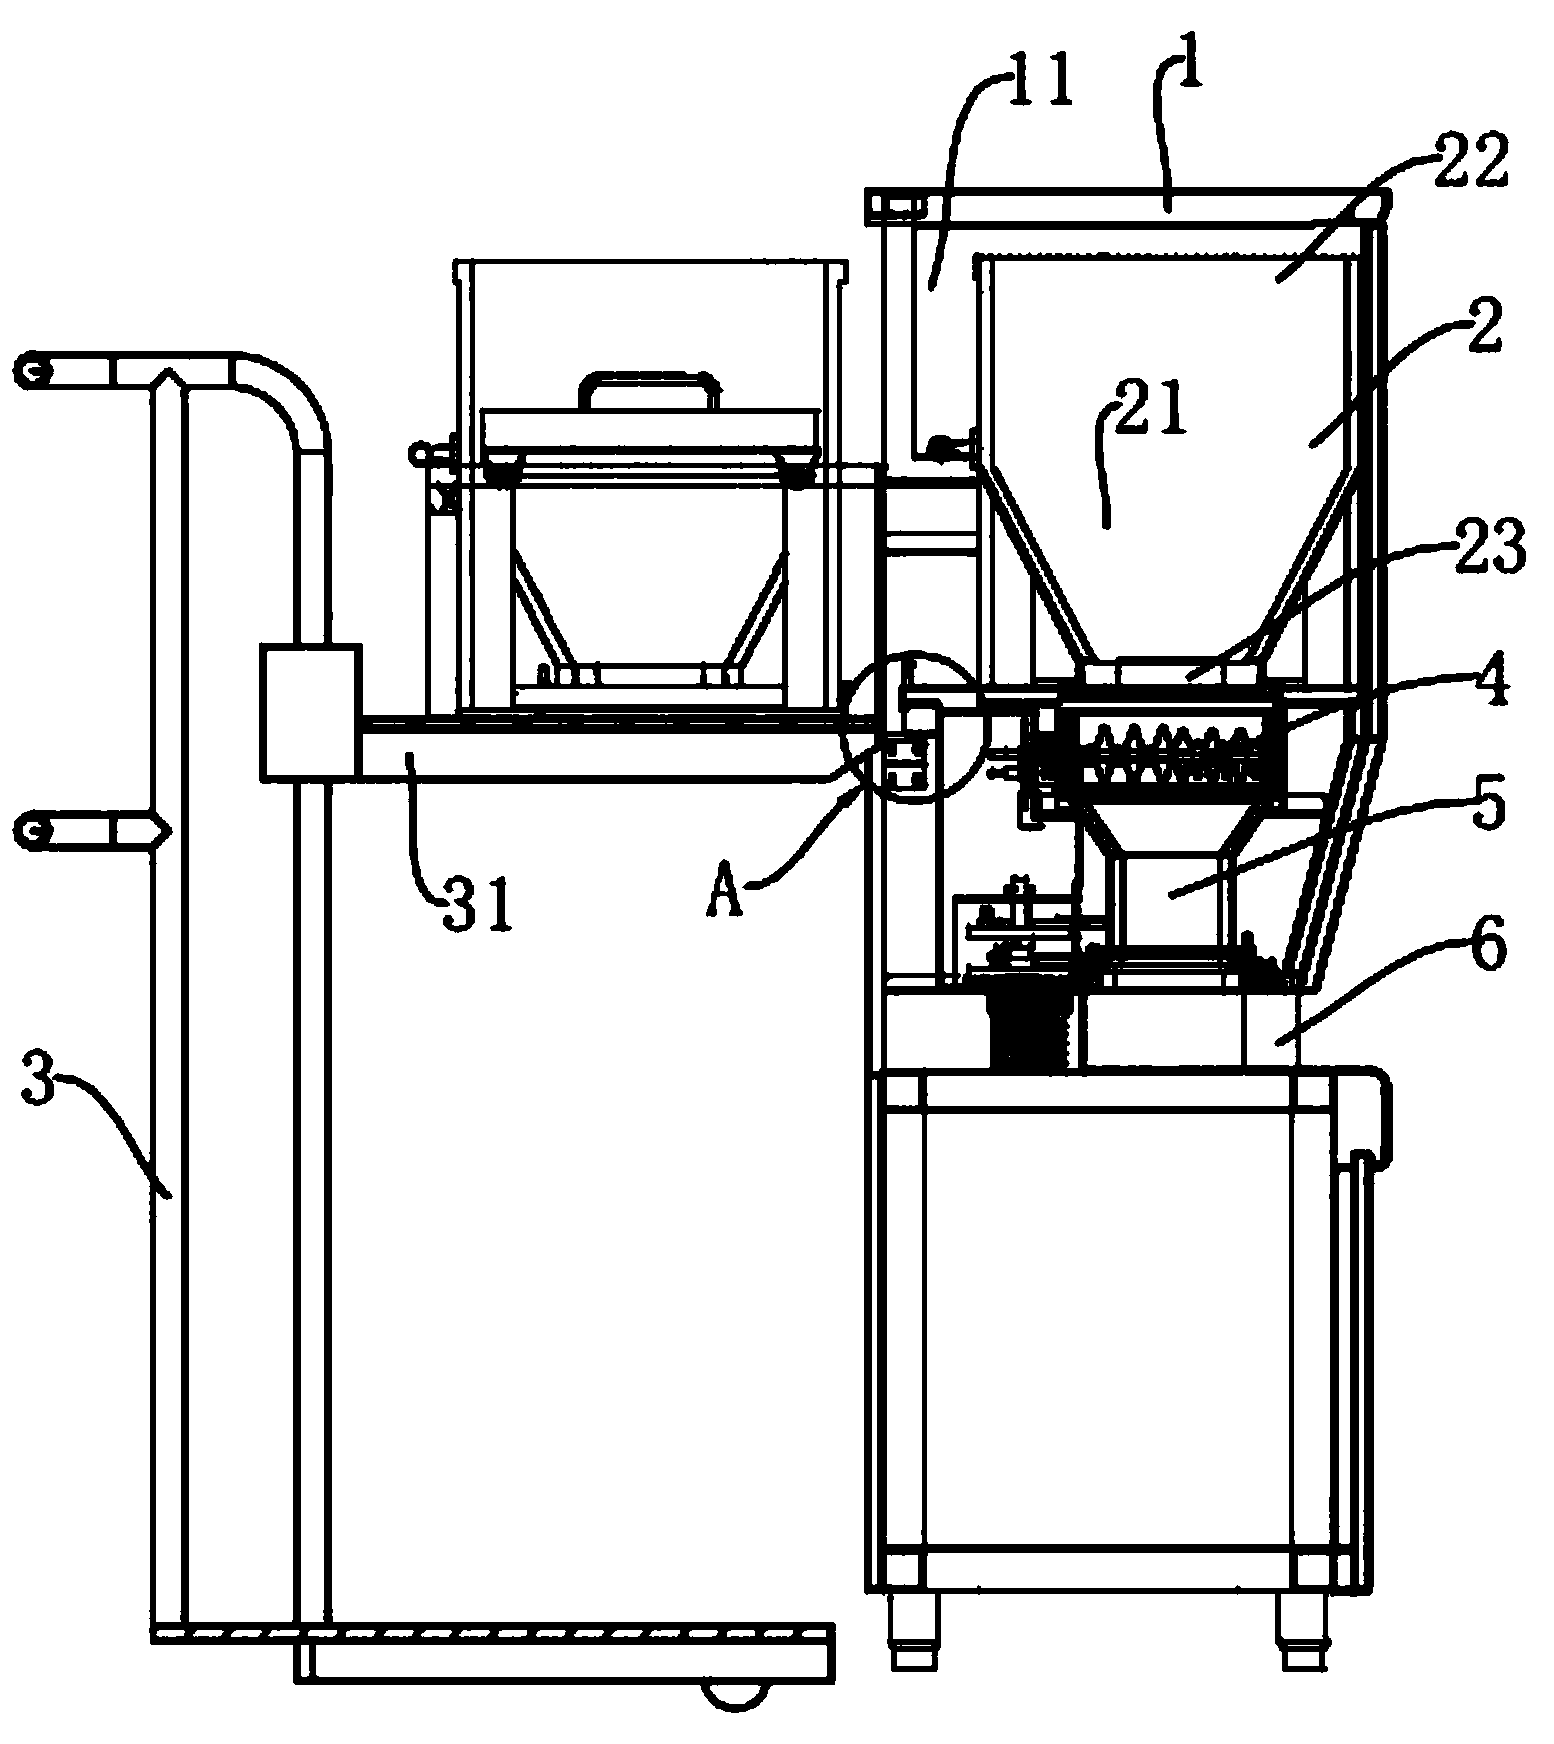 Automatic rice dividing machine with detachable rice storage device